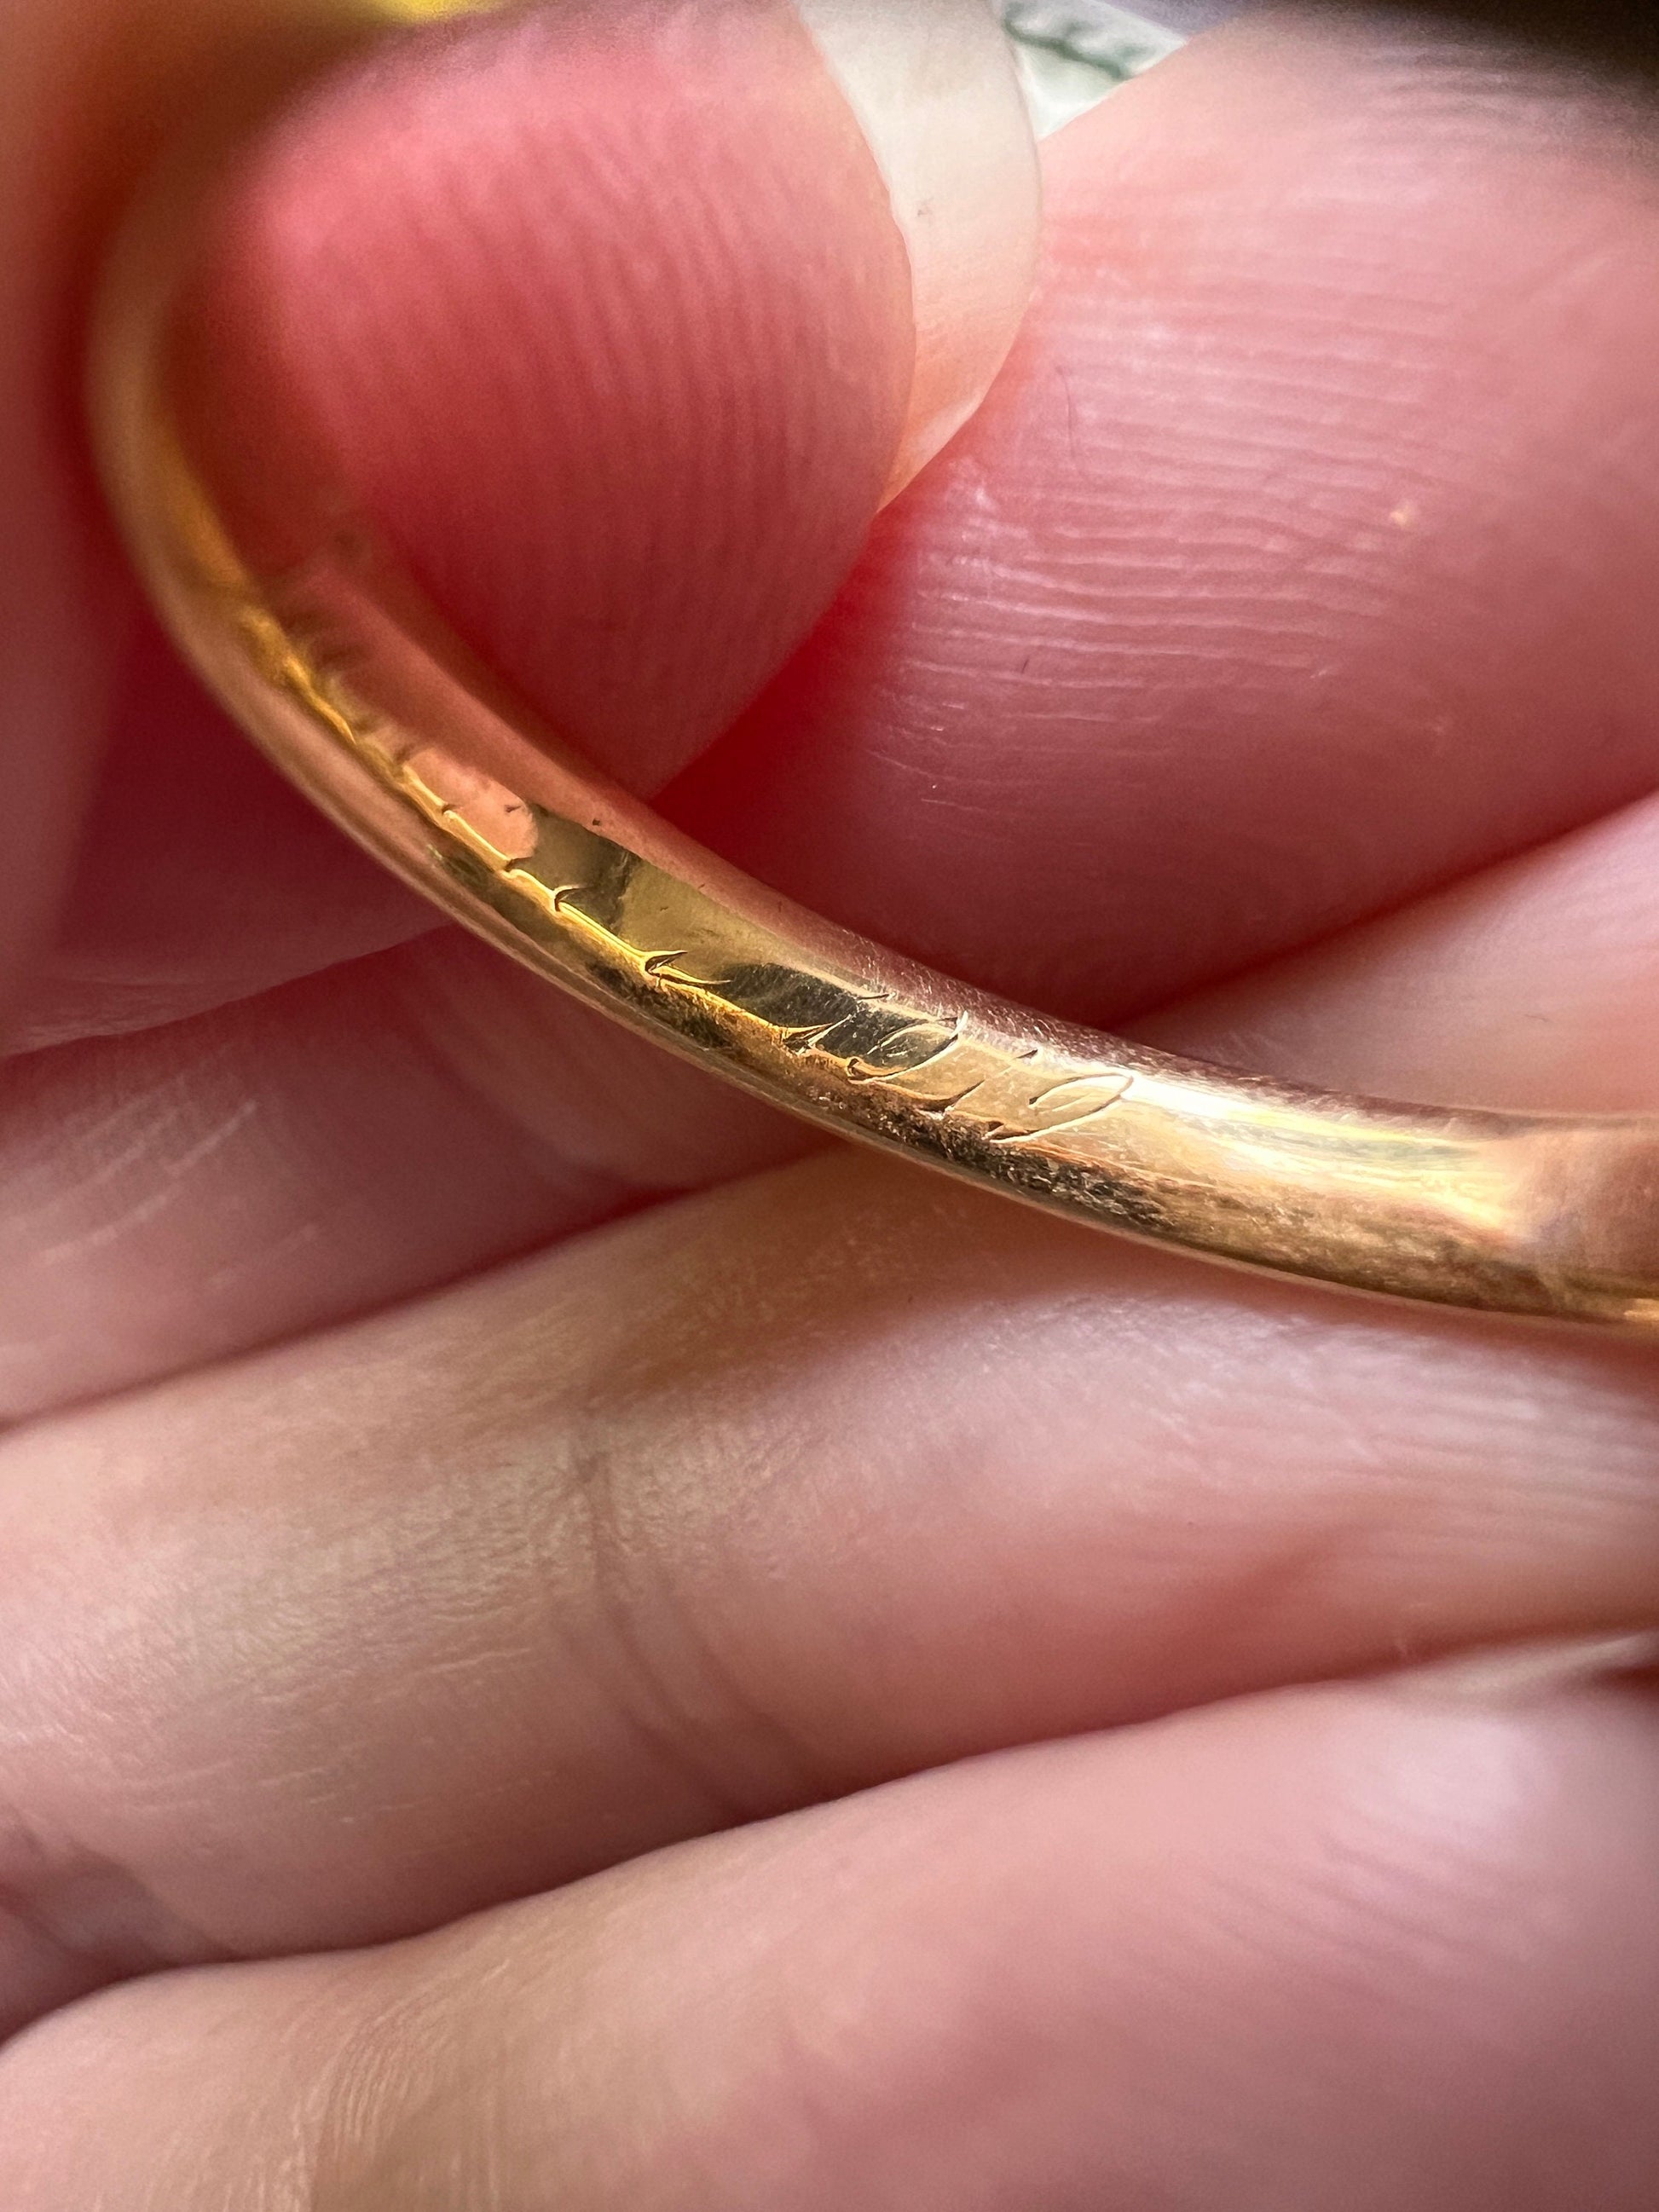 DATED 1919 ANTIQUE 18k Gold Comfort Fit French Wedding RING 2.6mm Wide Band Hand Engraved French Belle Epoque January 11 Stacker Love Gift